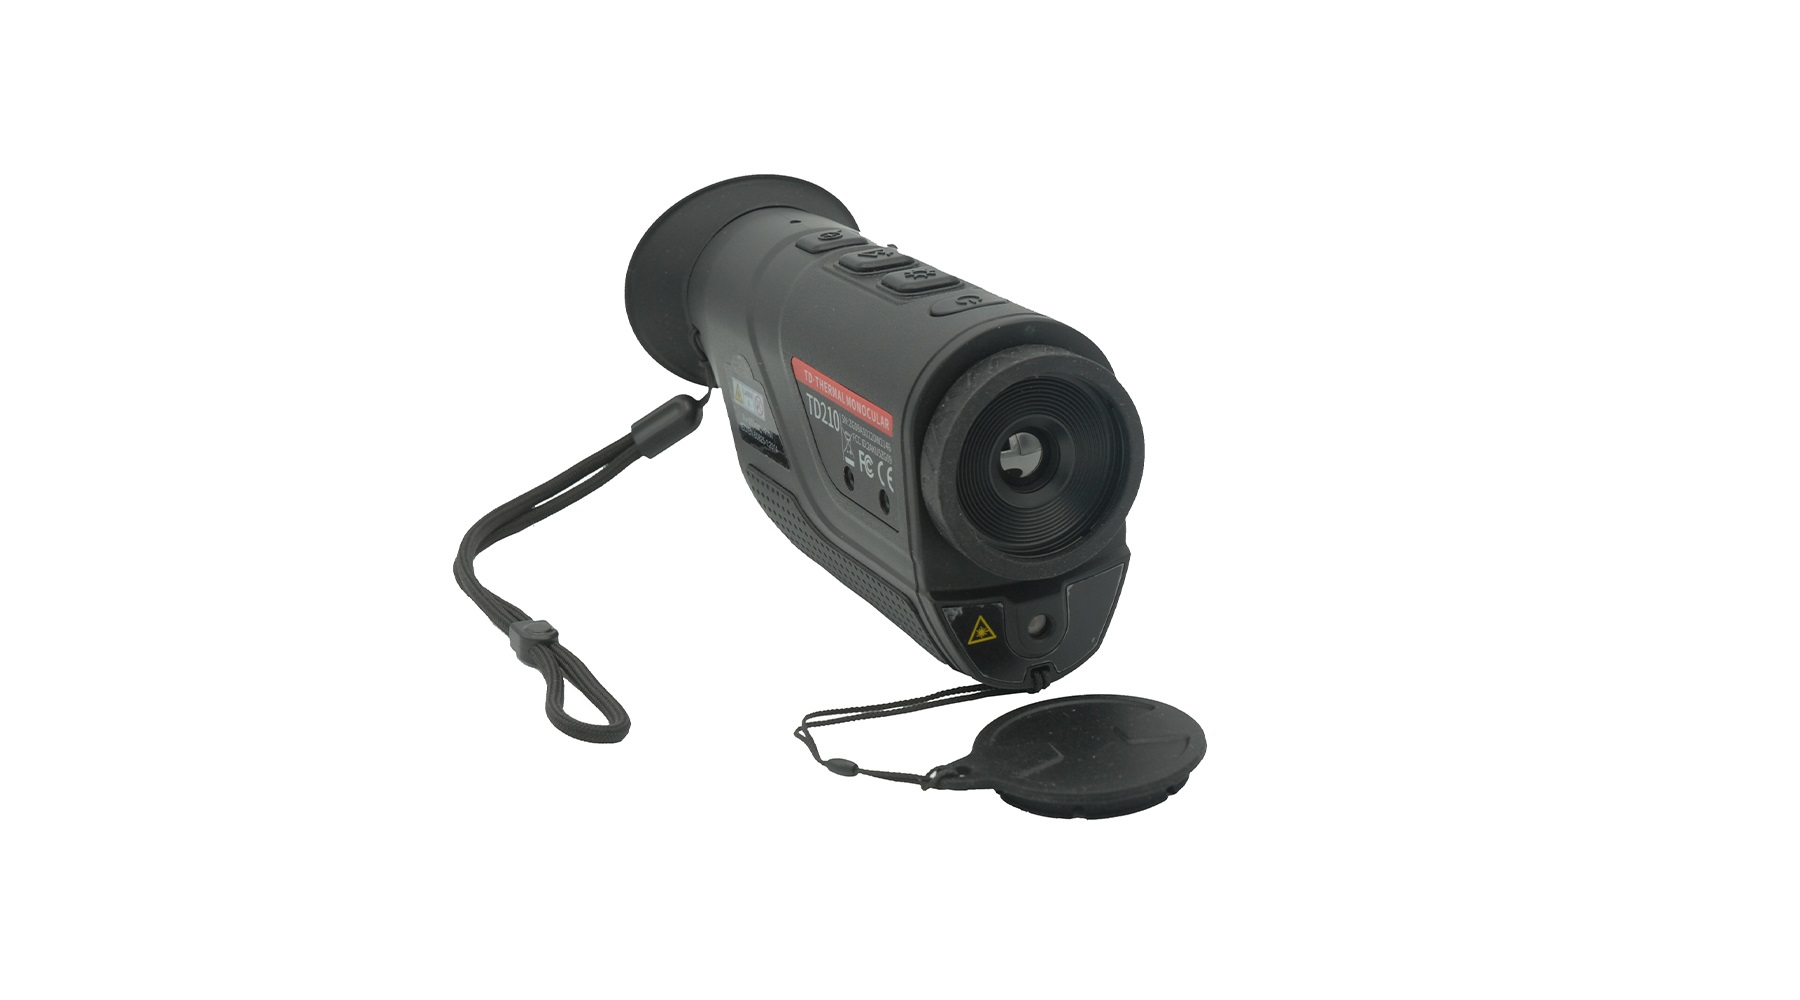 The New Infinity 50 “TM50” Thermal Monocular from X-Vision Optics